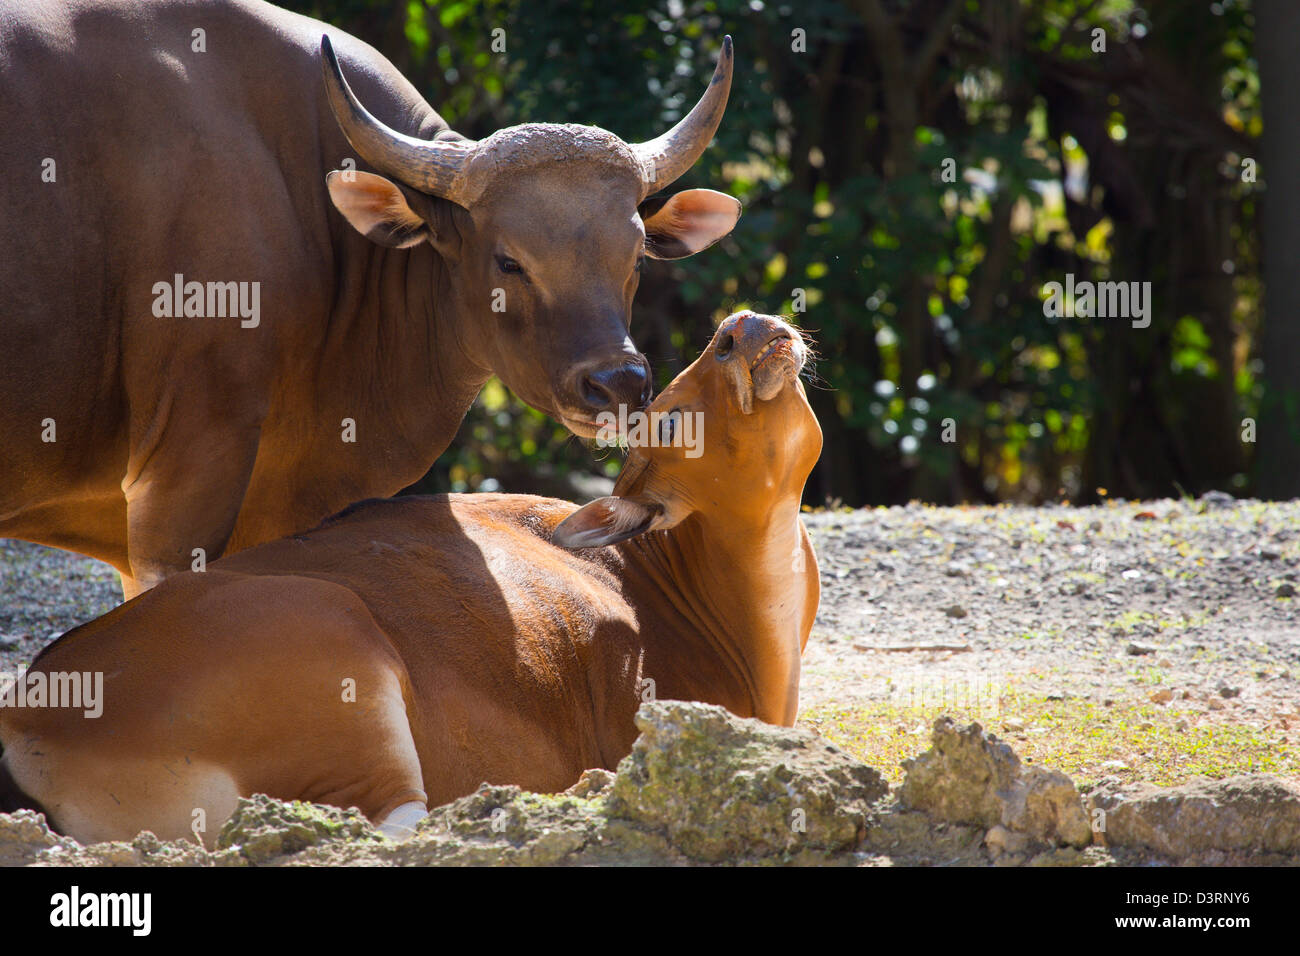 Animal showing affection by licking the another animal Stock Photo